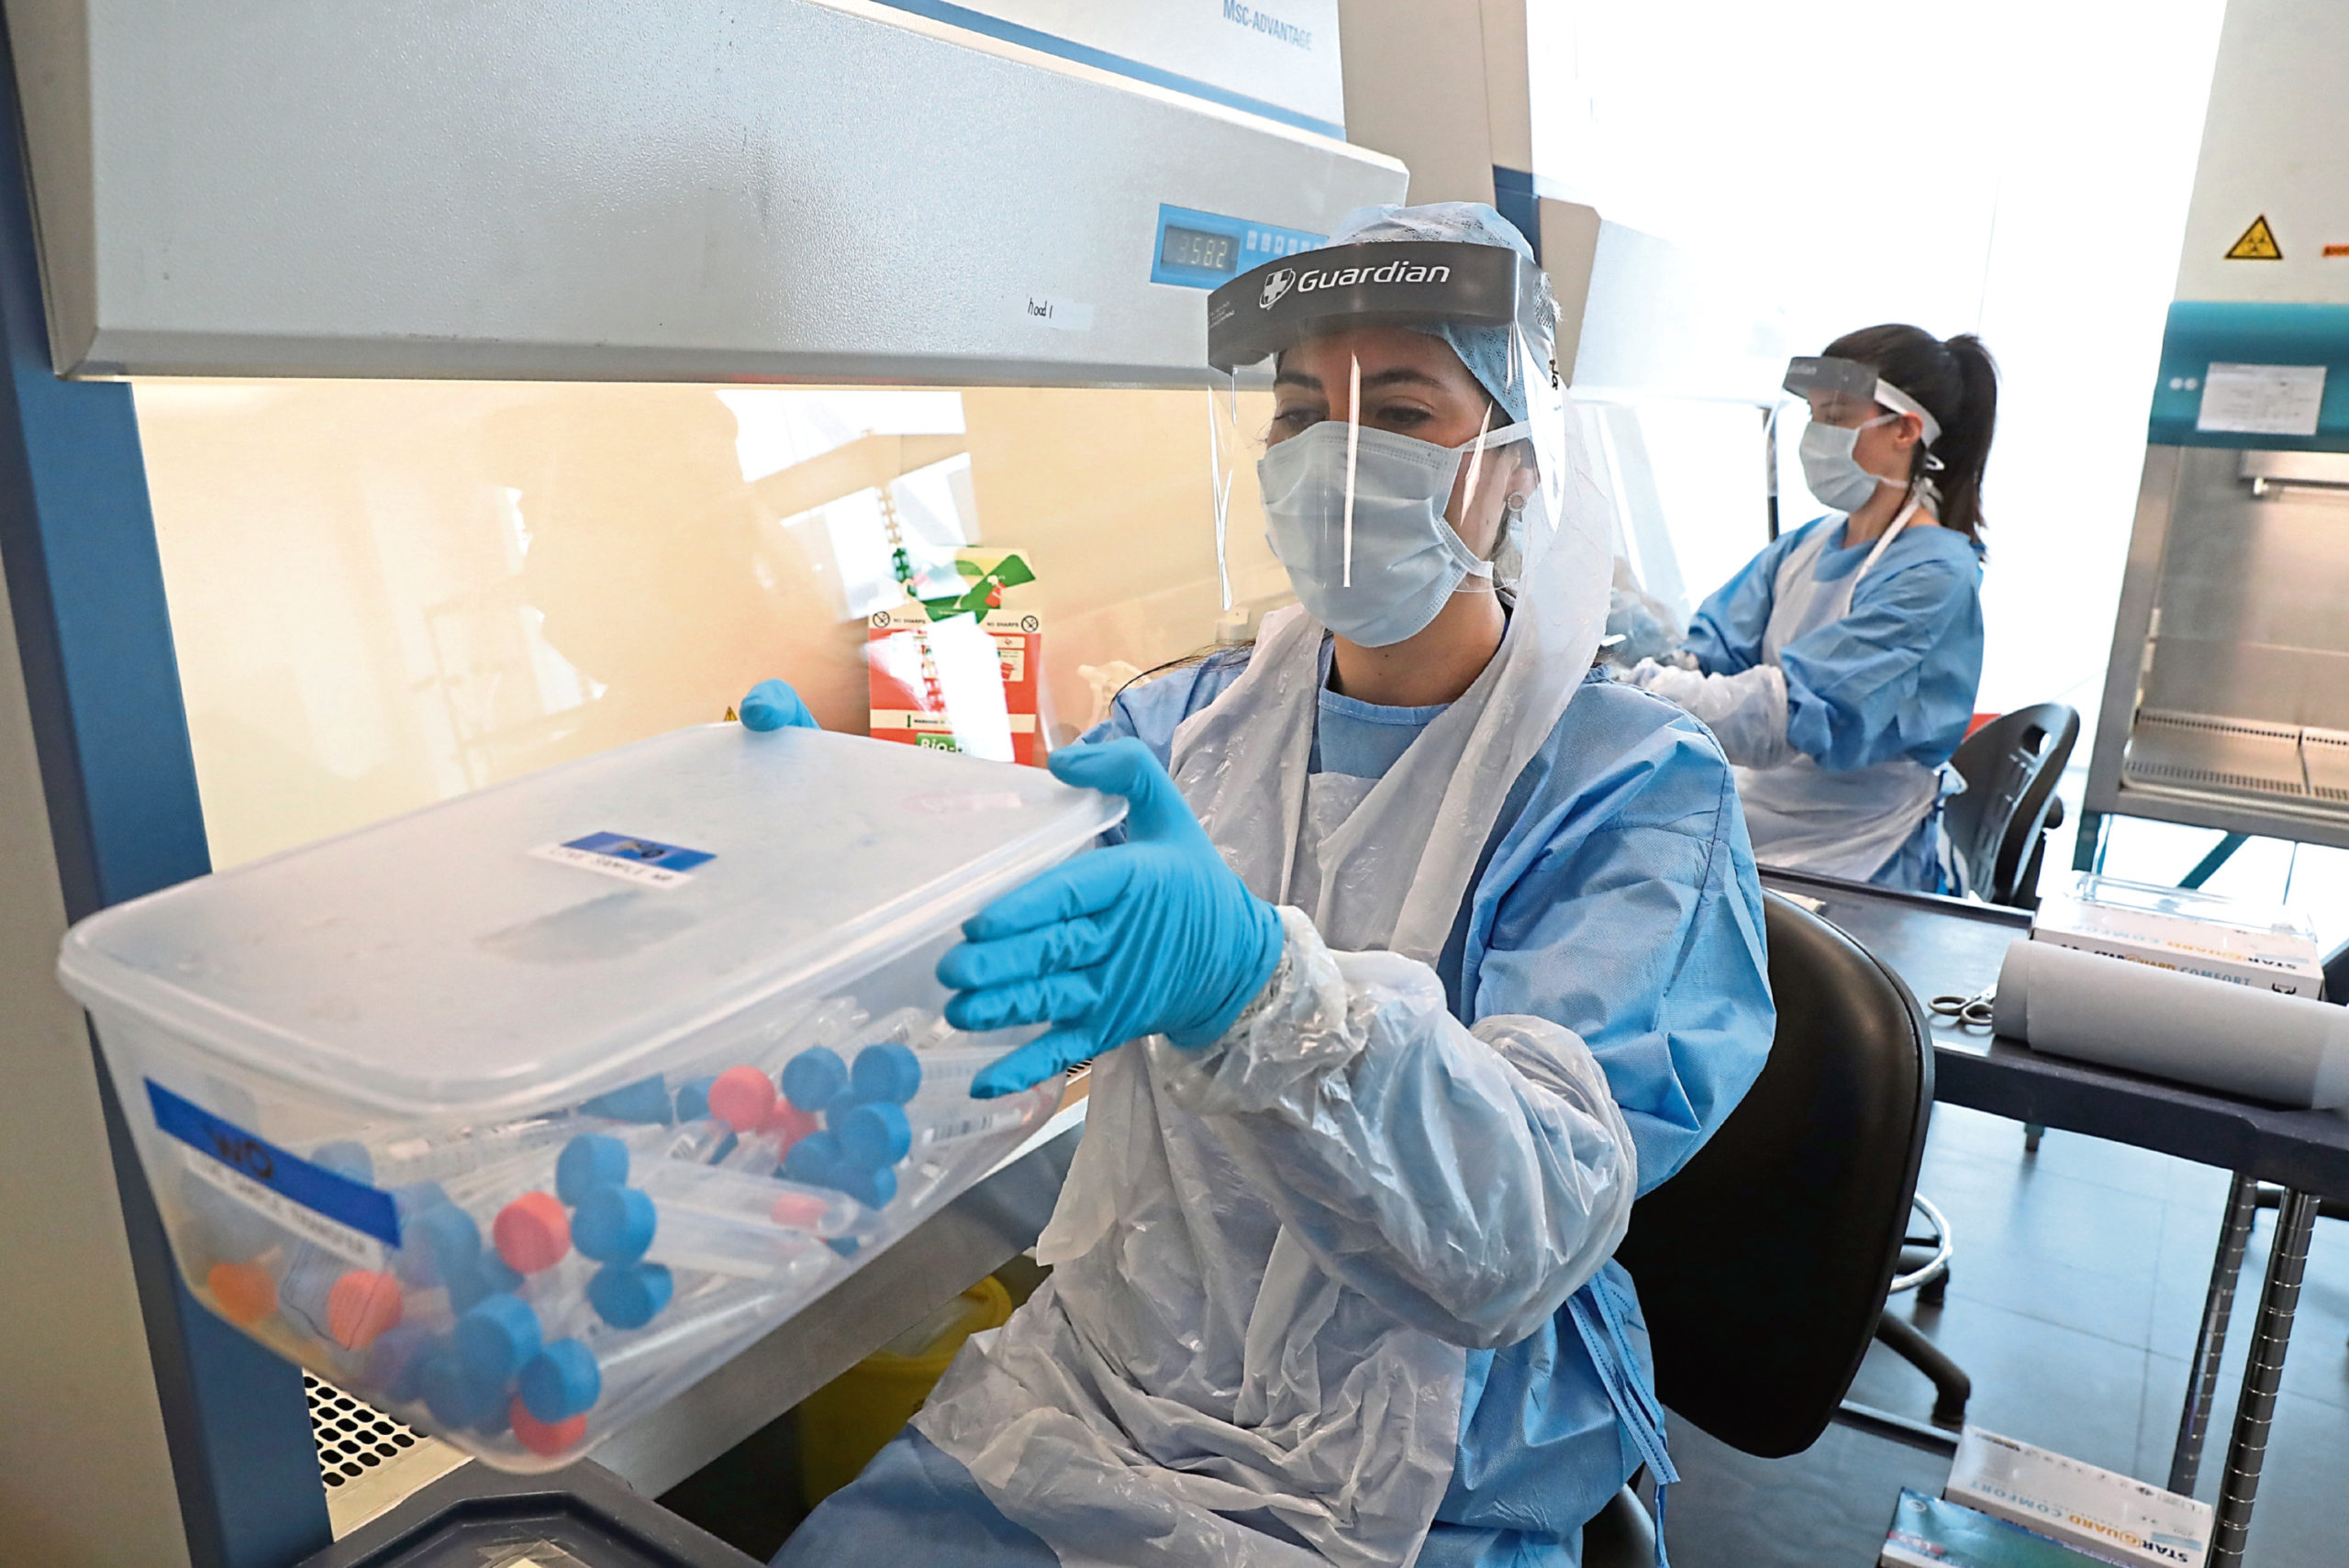 Scientists test Covid-19 samples at the laboratory at Queen Elizabeth University Hospital, Glasgow